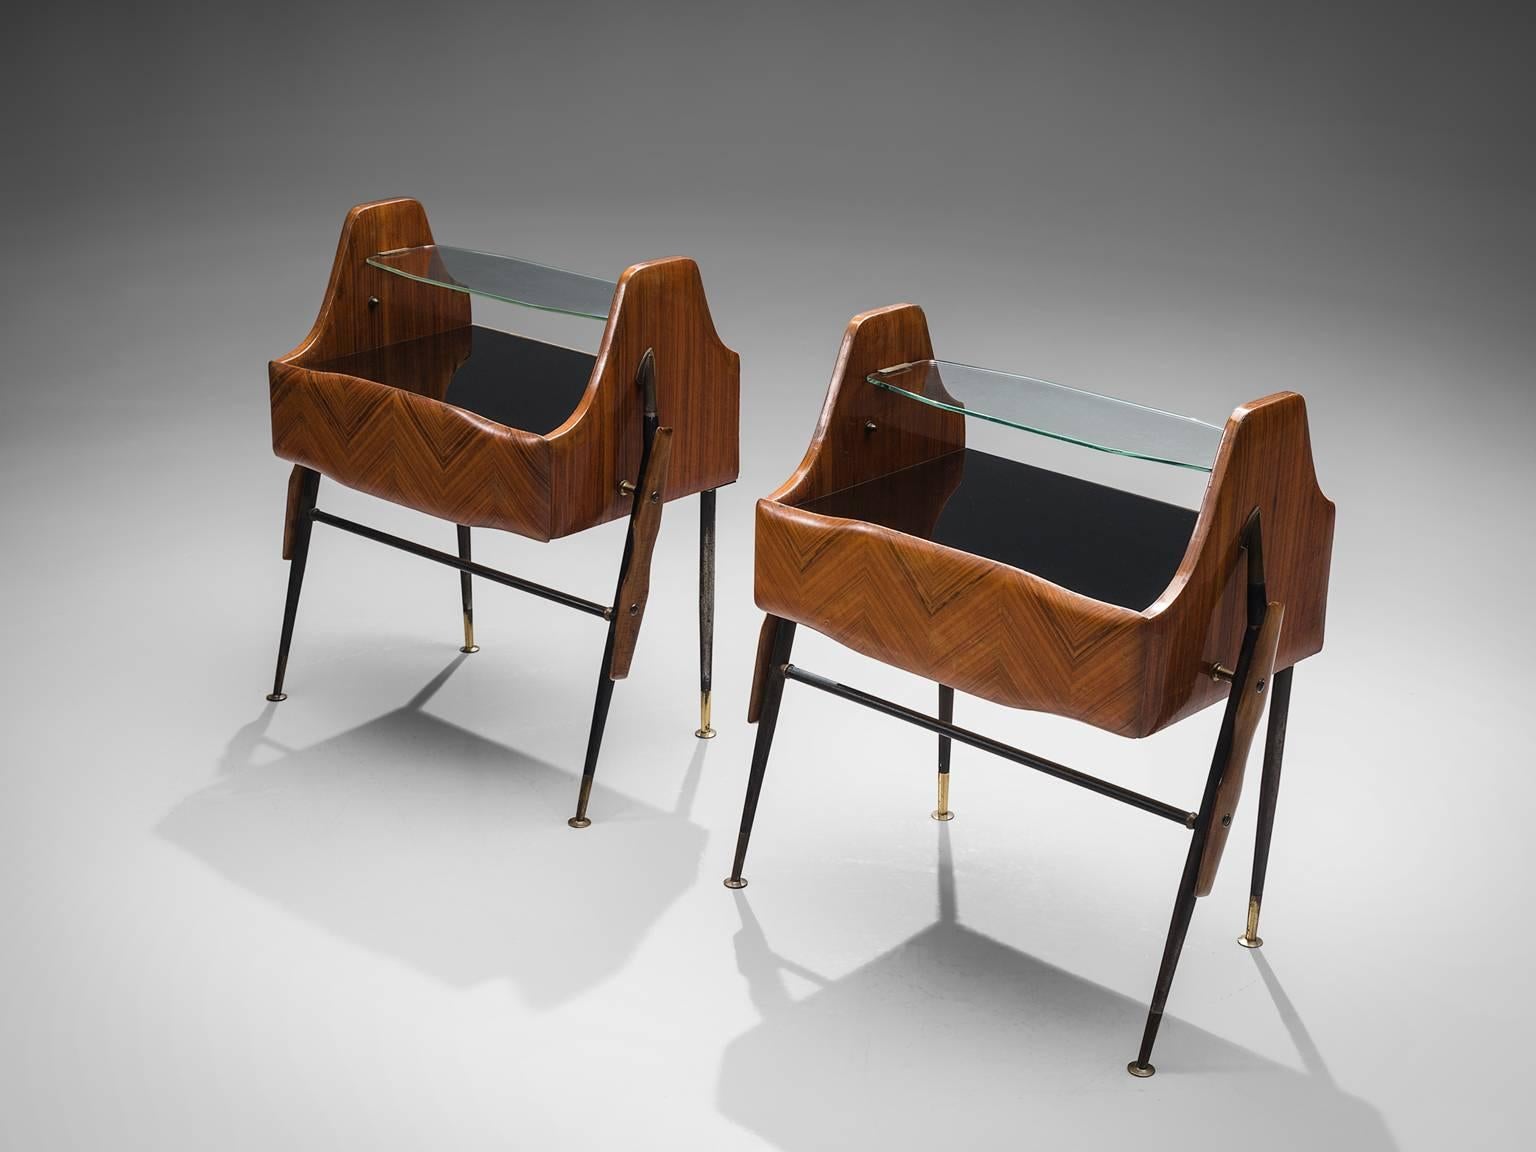 Nightstands, wood, metal, glass and brass, Italy, 1950s.

These two side tables or nightstands are both refined and elegant in every way. The glass top hangs in between the main body that has a rosewood inlayed pattern. The main body of the cabinet